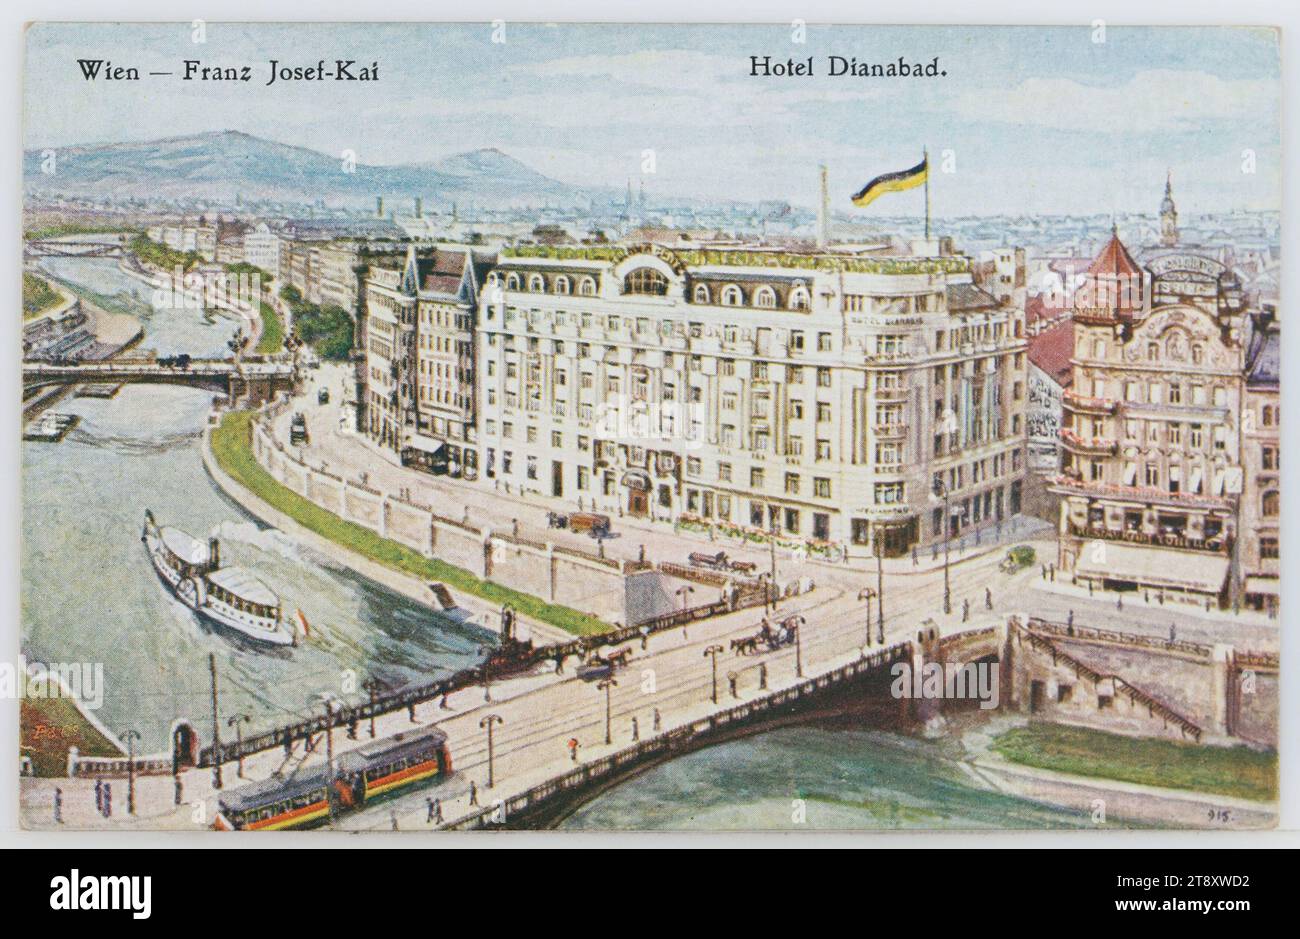 Vienna - Franz Josef-Kai, Hotel Dianabad, Hans Nachbargauer, Producer, 1918-1920, coated paperboard, halftone print, Danube, Hotel and Restaurant Industry, Public Transport, Media and Communication, traffic and transport, Postcards with transliteration, 2nd District: Leopoldstadt, ships (in general), canals, waters (in city), quay, bridge, railway, tramway; rack railway, Dianabad, handwriting, written text (CZECH), The Vienna Collection Stock Photo